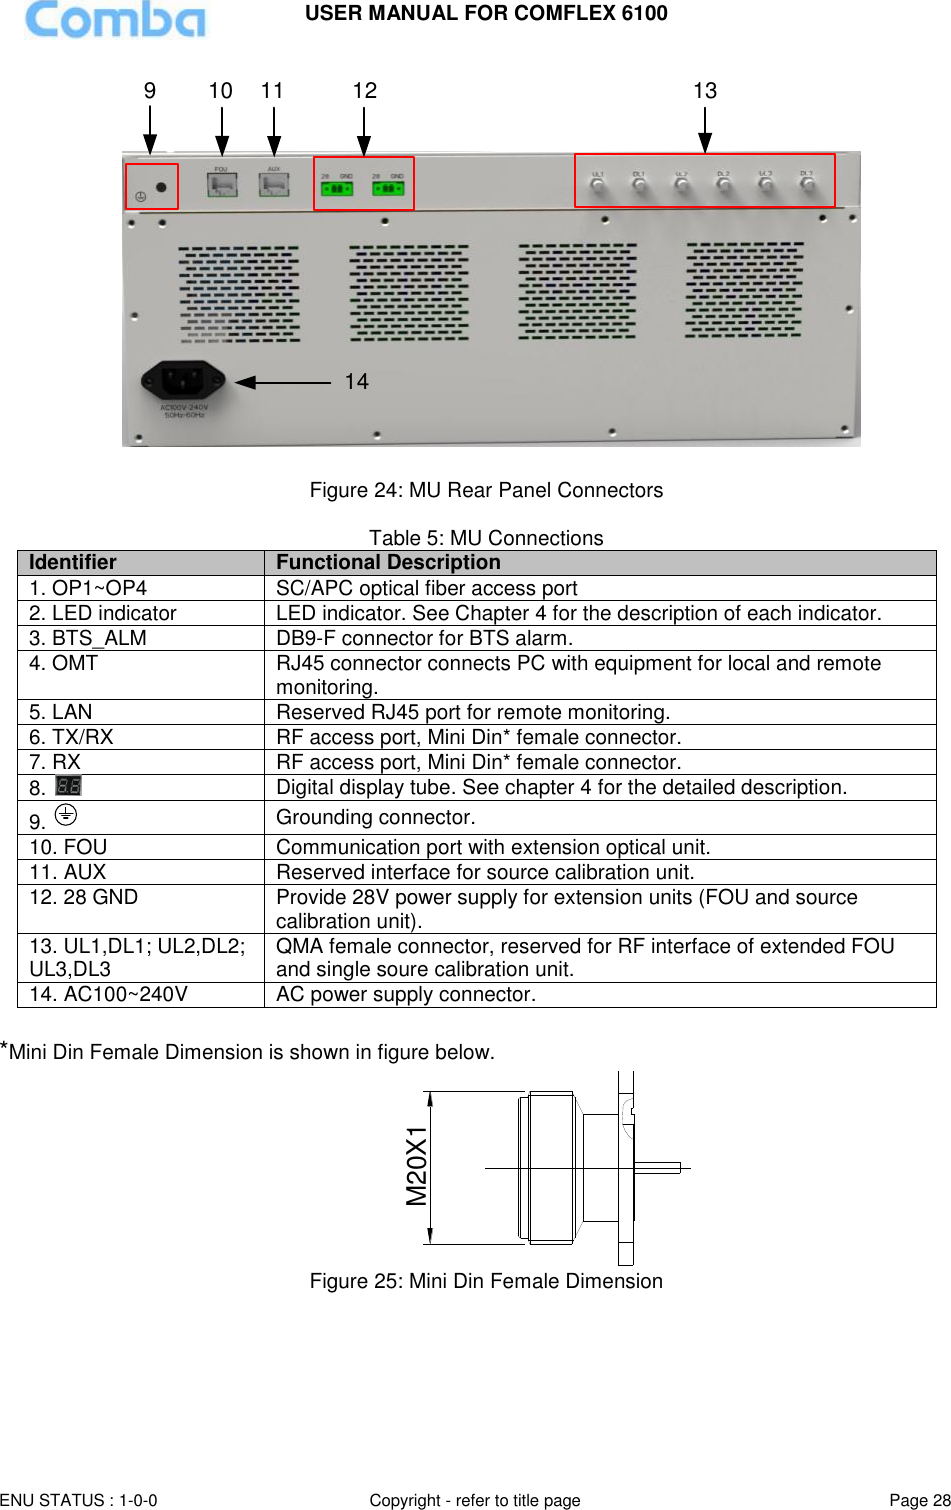 USER MANUAL FOR COMFLEX 6100 ENU STATUS : 1-0-0 Copyright - refer to title page Page 28  9 10 11 12 1314  Figure 24: MU Rear Panel Connectors  Table 5: MU Connections Identifier Functional Description 1. OP1~OP4 SC/APC optical fiber access port 2. LED indicator LED indicator. See Chapter 4 for the description of each indicator.  3. BTS_ALM DB9-F connector for BTS alarm. 4. OMT RJ45 connector connects PC with equipment for local and remote monitoring. 5. LAN Reserved RJ45 port for remote monitoring. 6. TX/RX RF access port, Mini Din* female connector. 7. RX RF access port, Mini Din* female connector. 8.   Digital display tube. See chapter 4 for the detailed description. 9.   Grounding connector. 10. FOU Communication port with extension optical unit. 11. AUX Reserved interface for source calibration unit. 12. 28 GND Provide 28V power supply for extension units (FOU and source calibration unit). 13. UL1,DL1; UL2,DL2; UL3,DL3 QMA female connector, reserved for RF interface of extended FOU and single soure calibration unit.  14. AC100~240V AC power supply connector.  *Mini Din Female Dimension is shown in figure below. M20X1 Figure 25: Mini Din Female Dimension  